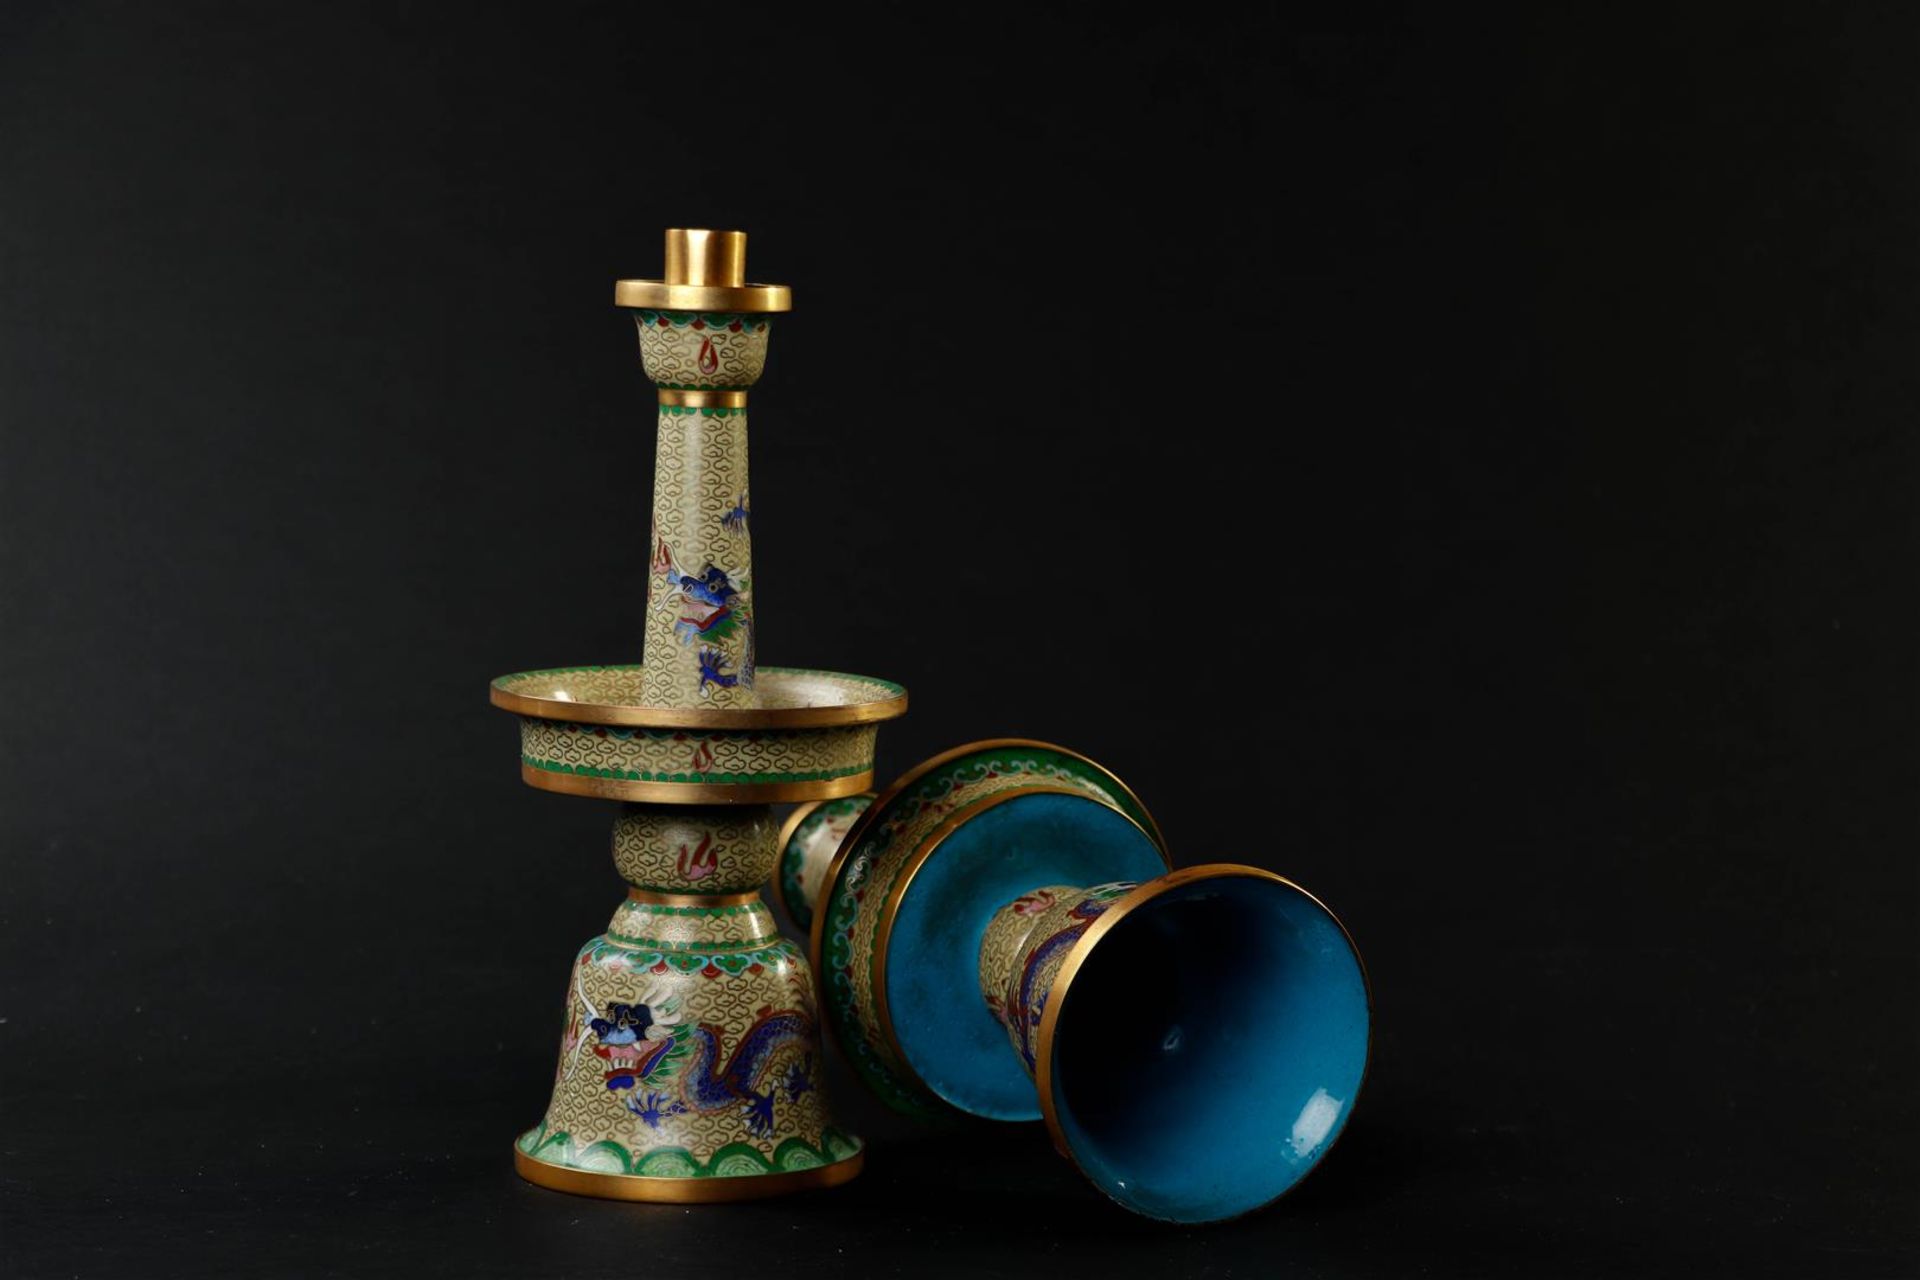 A pair of cloisonne candlesticks decorated with dragons. China, 20th century.
H. 27 cm. - Image 4 of 5